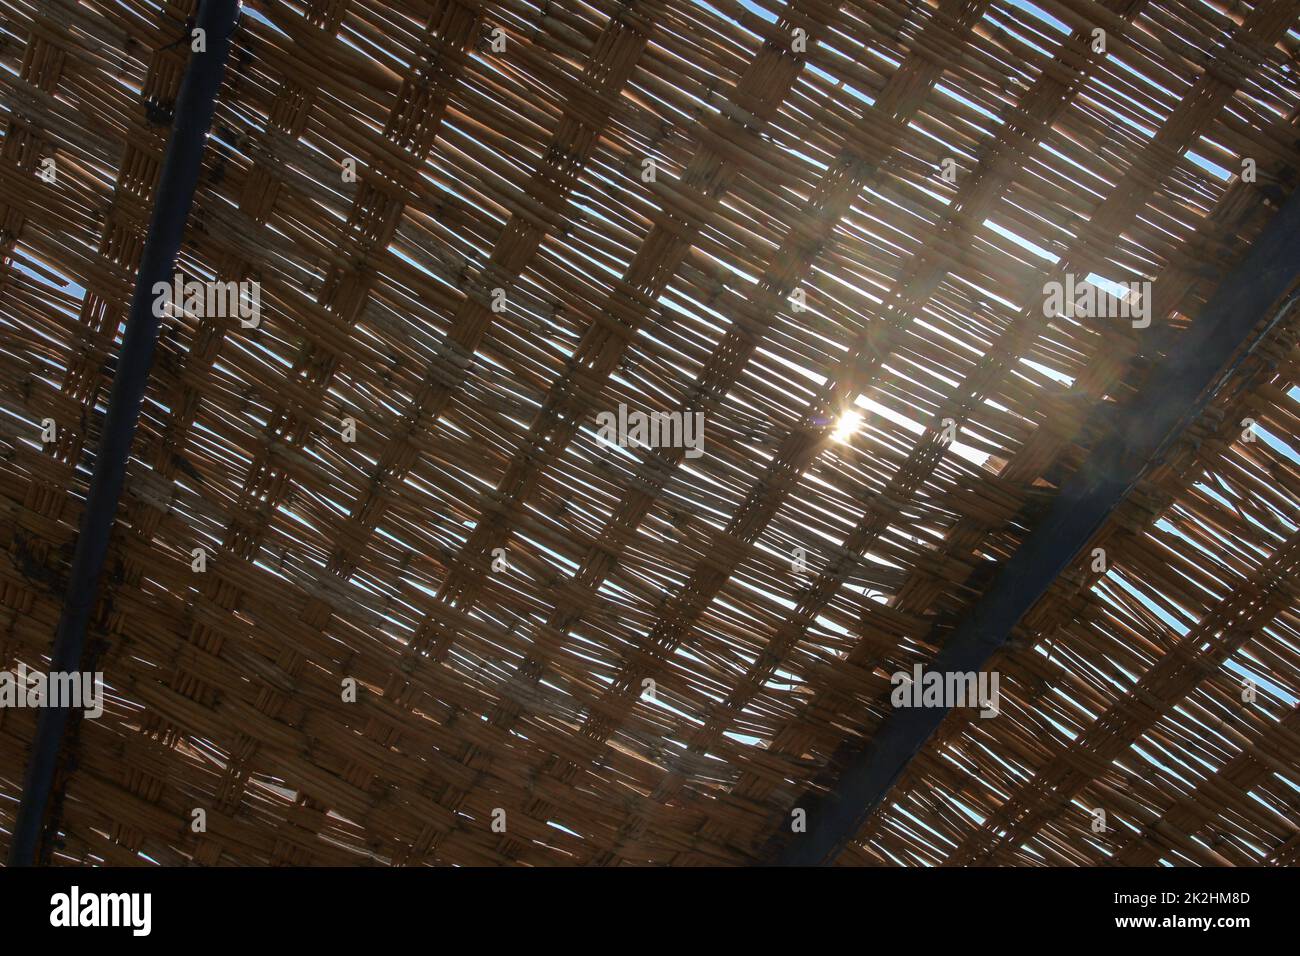 View through palm leaves roof, sun shining behind. Abstract tropical background. Stock Photo